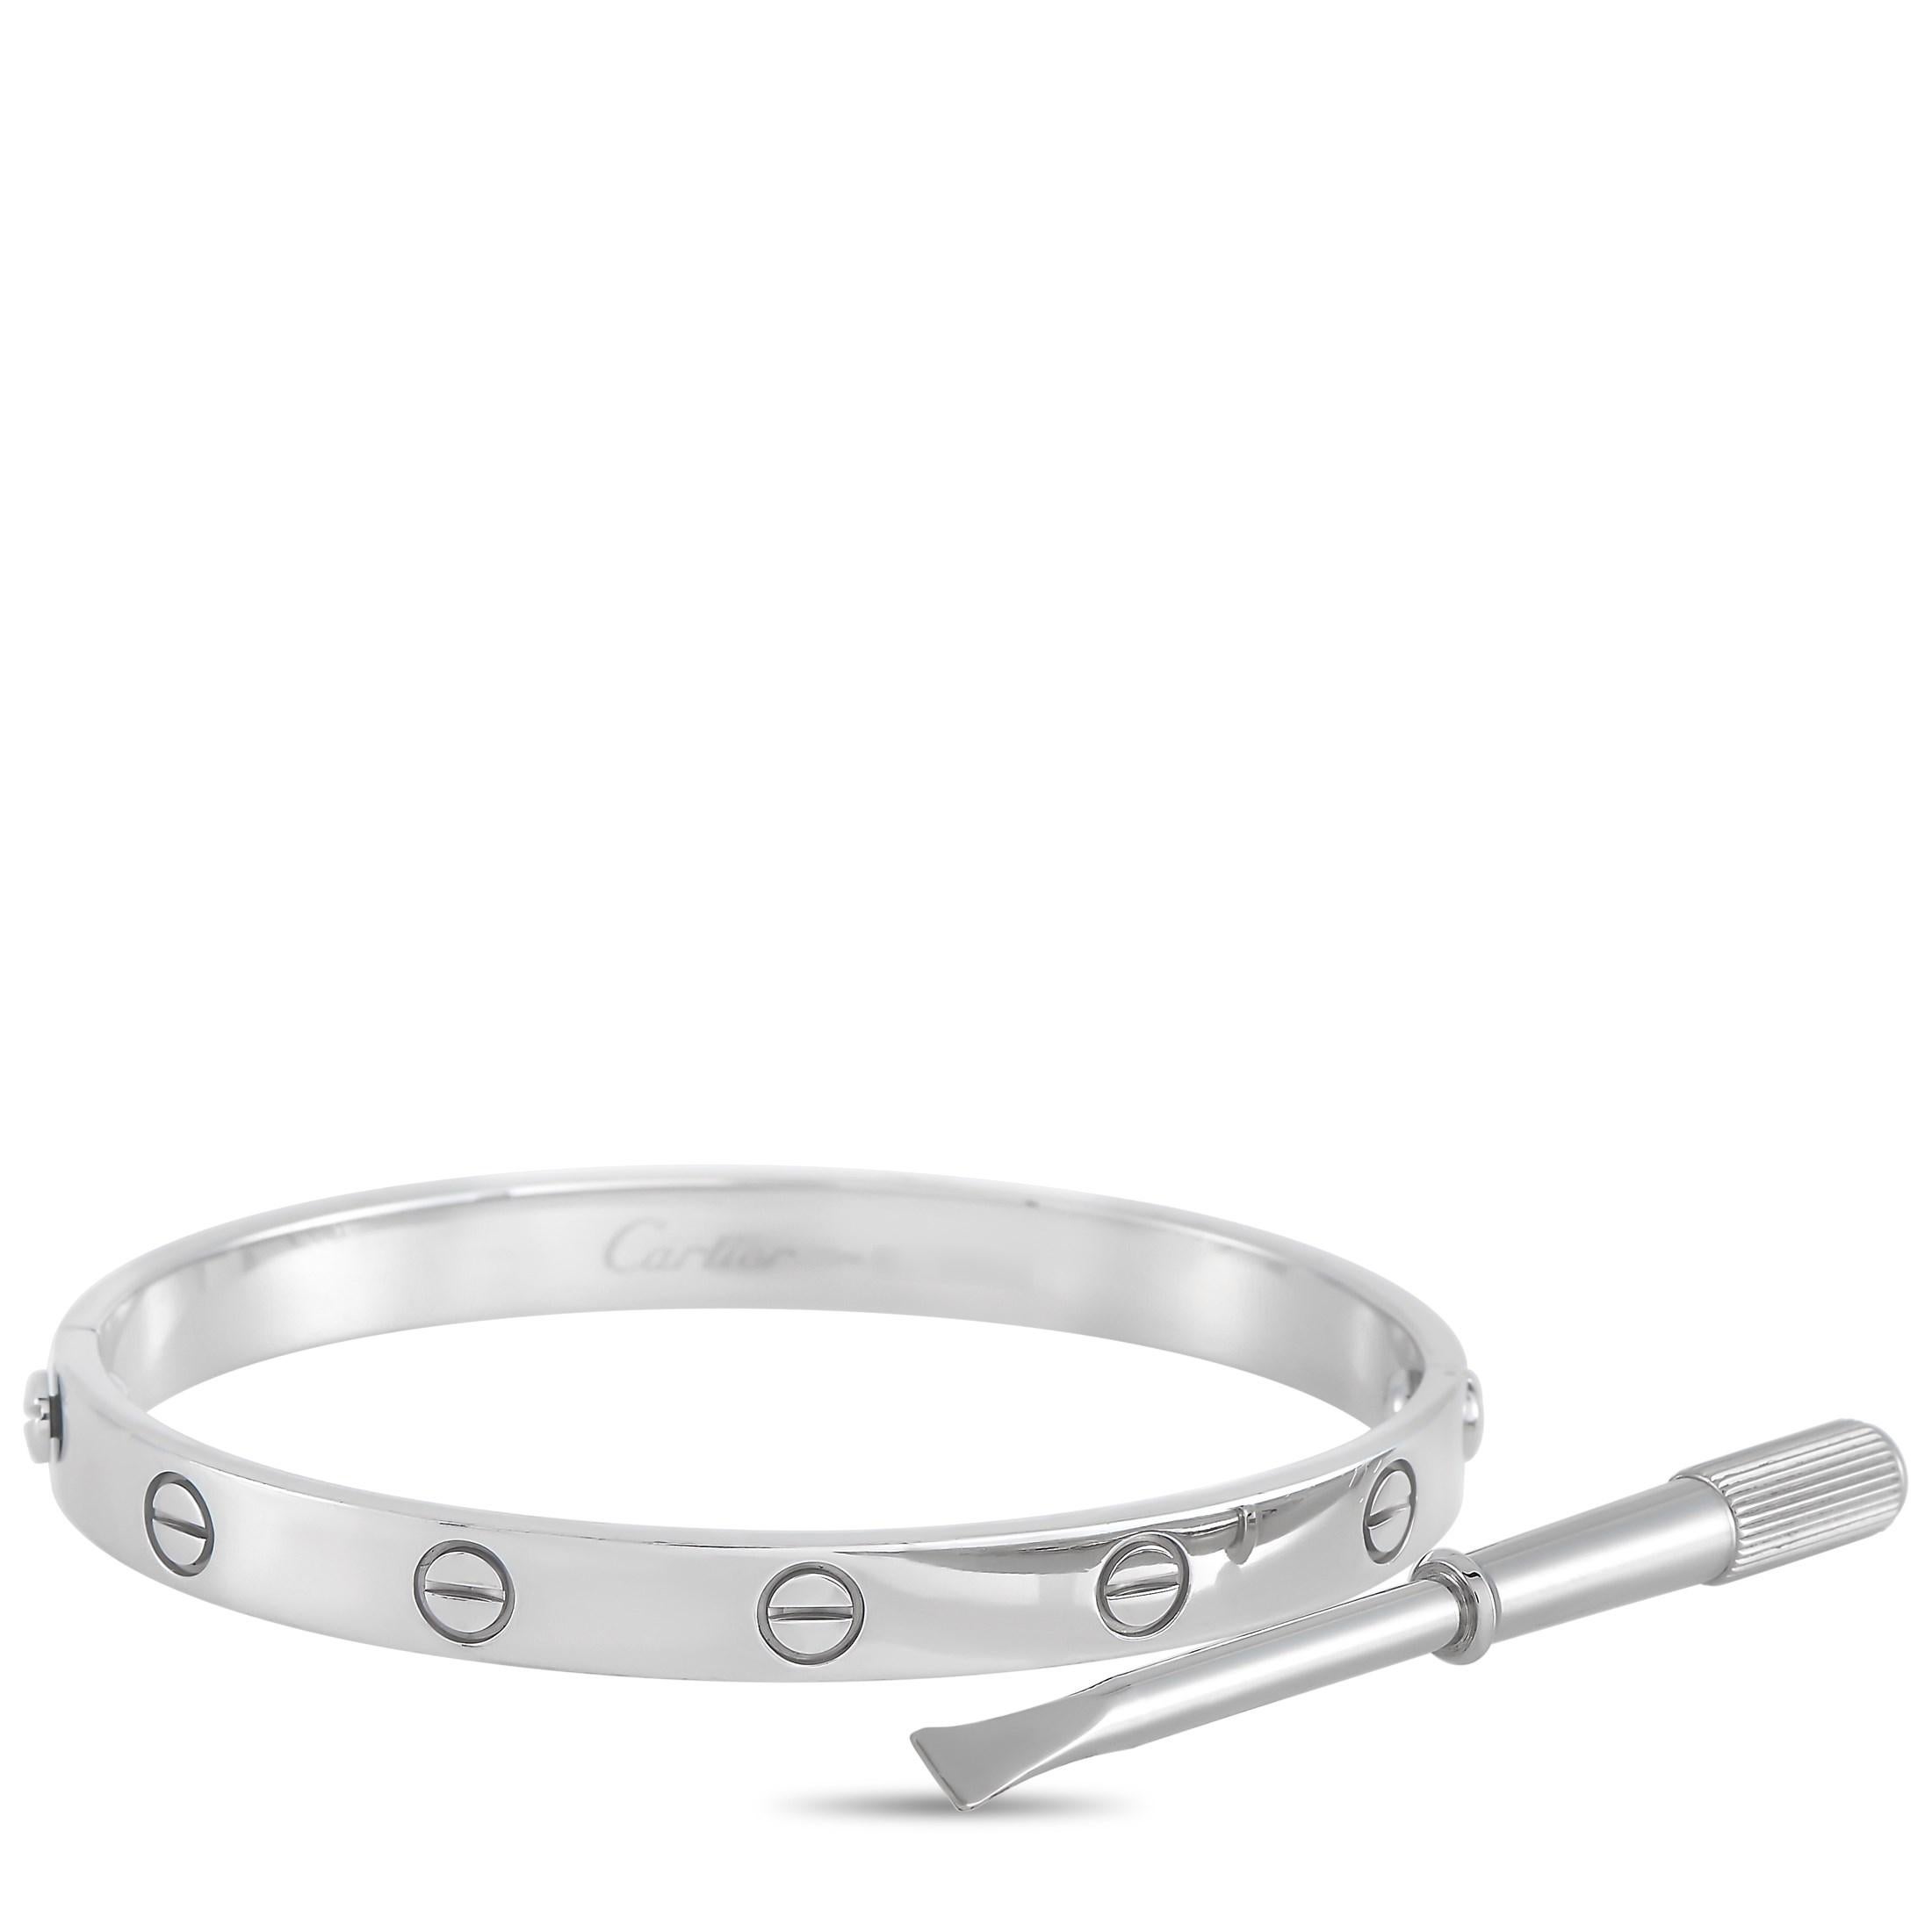 This LOVE bracelet is a classic Cartier offering. The bangle is made with 18K white gold and features the iconic Cartier screw motif. The inside of the bangle is inscribed with the Cartier brand name. The bracelet is a size 16, and has a diameter of